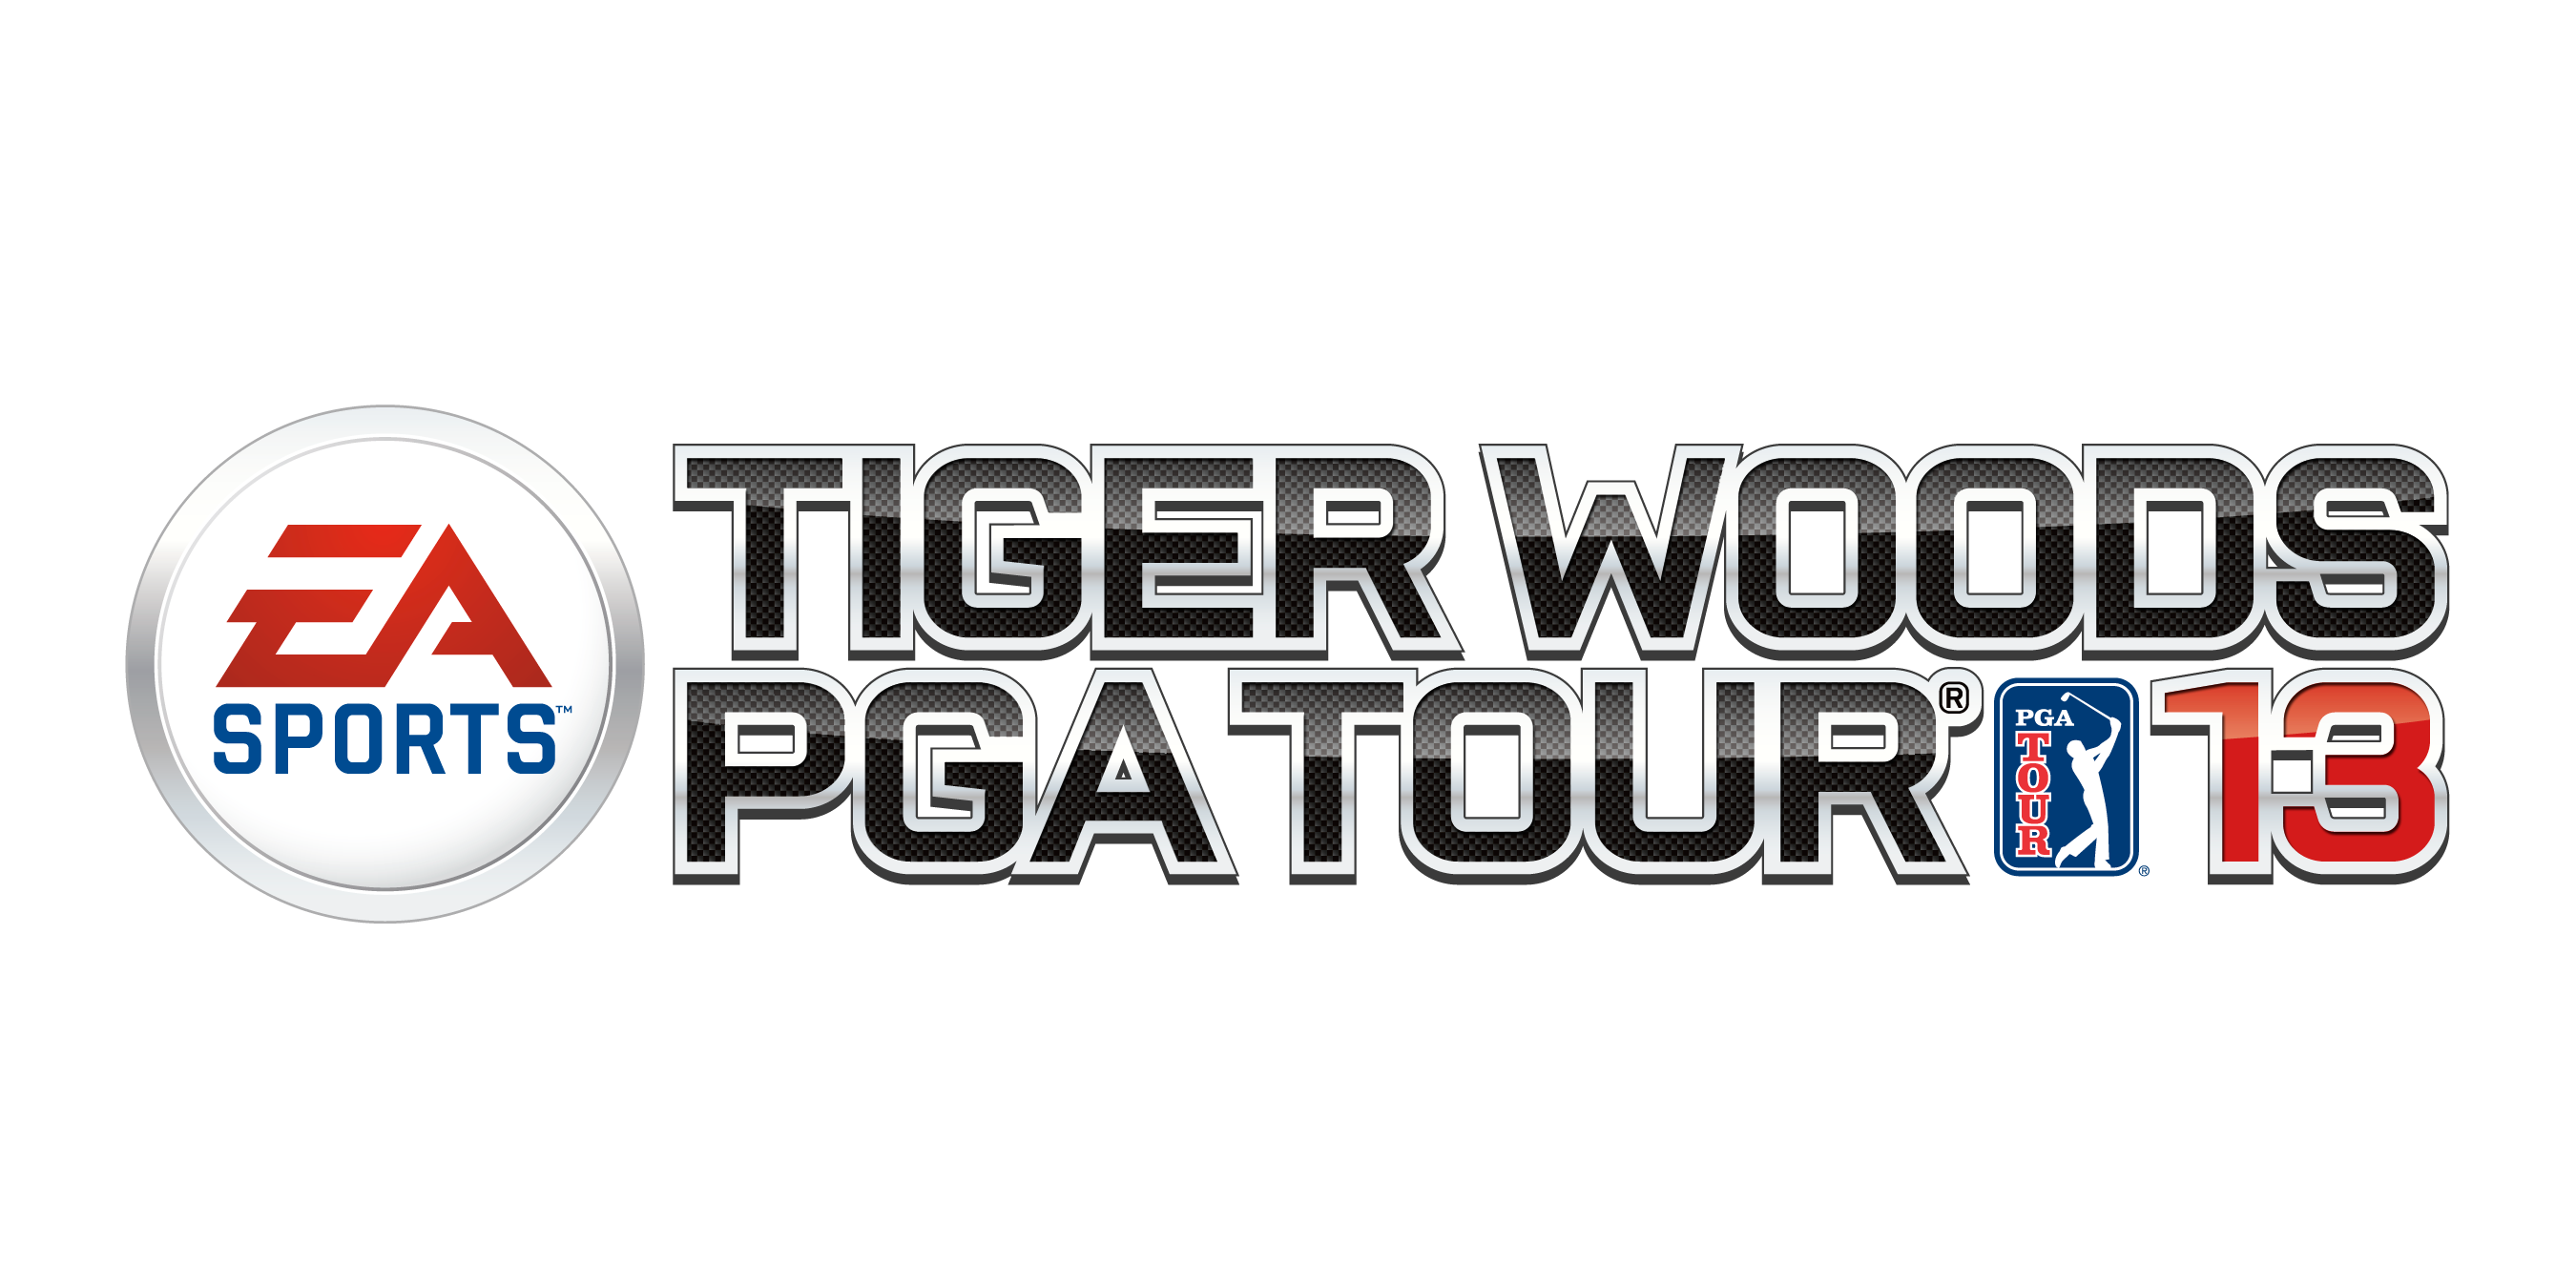 Tiger Woods 08 Patch Download